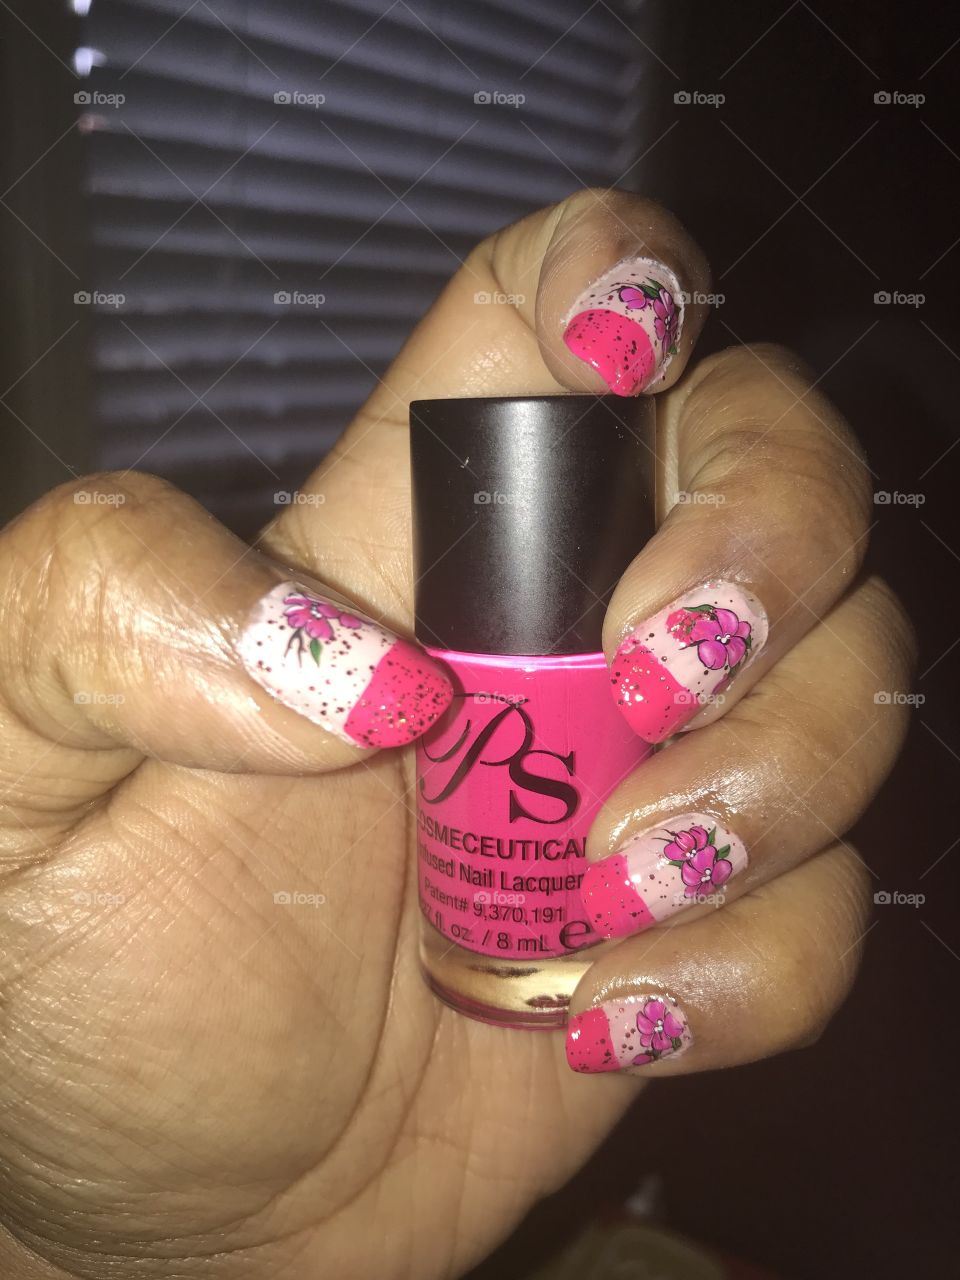 Hot pink French manicure with glitter and water decals